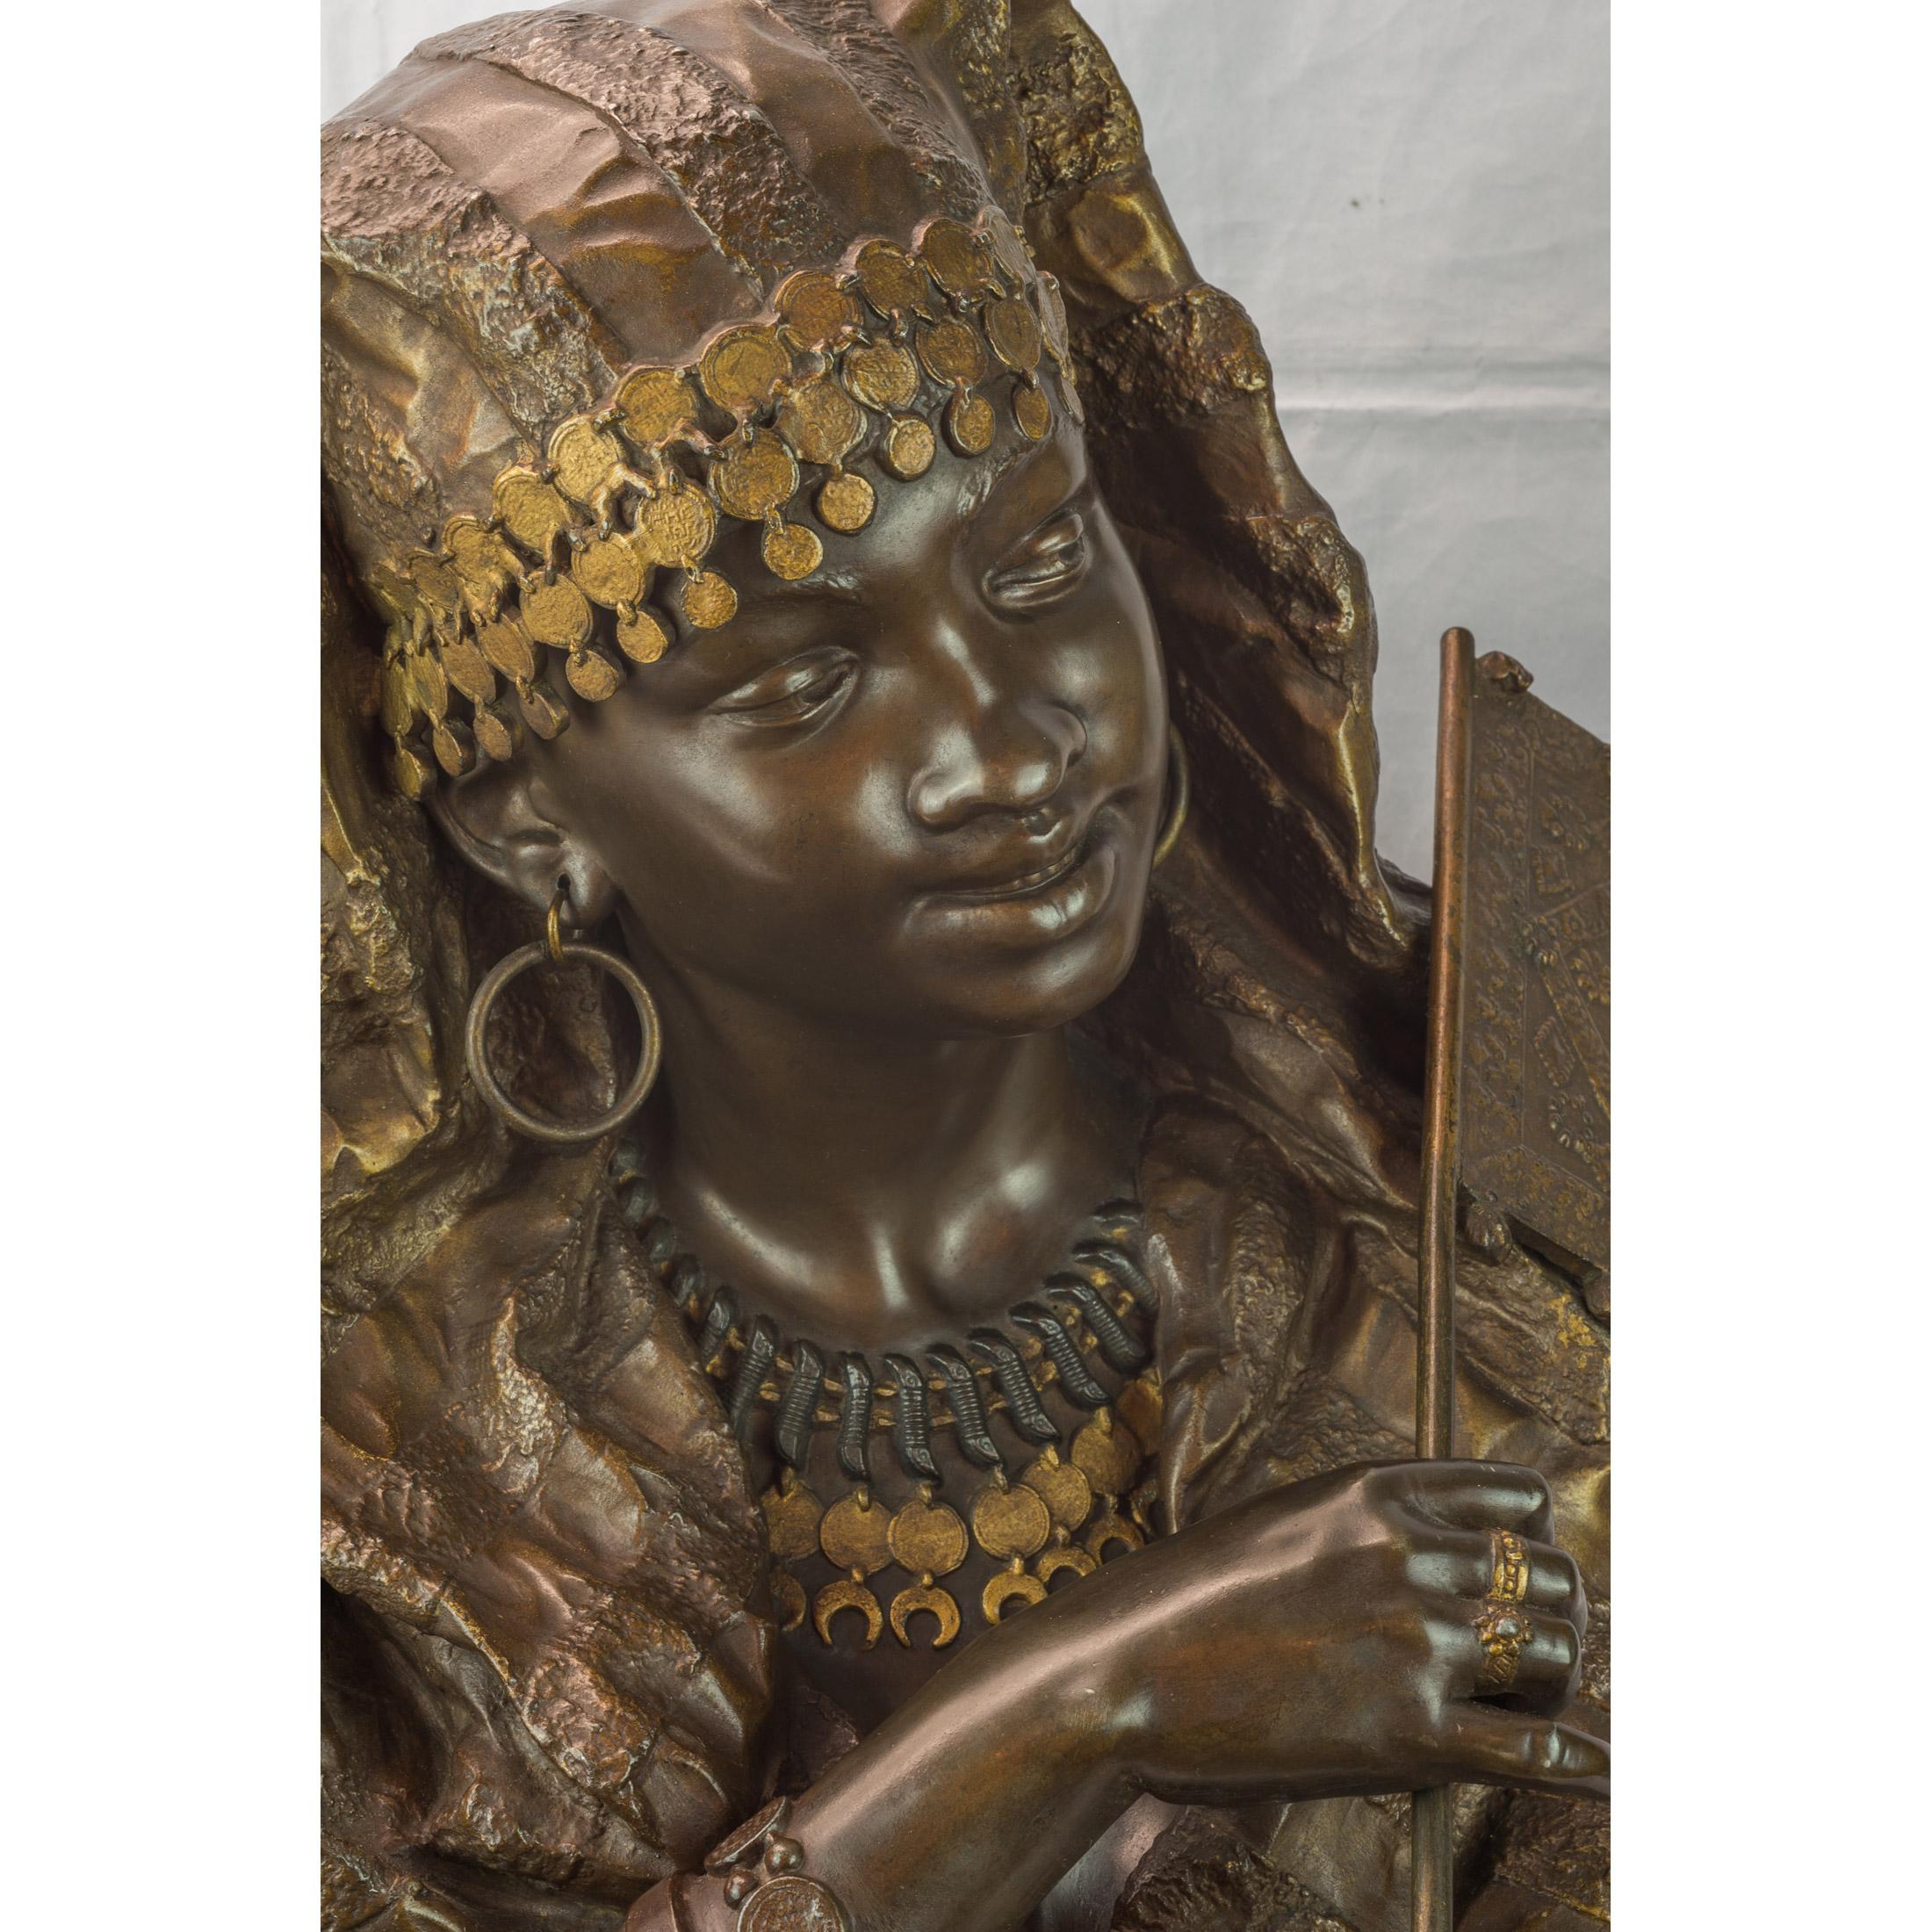 GASTON LEROUX
French, (1854-1942)

Polychrome and gilt bronze bust of a gypsy woman
           
H 24 in. x W 15.50 in. x D 14 in.